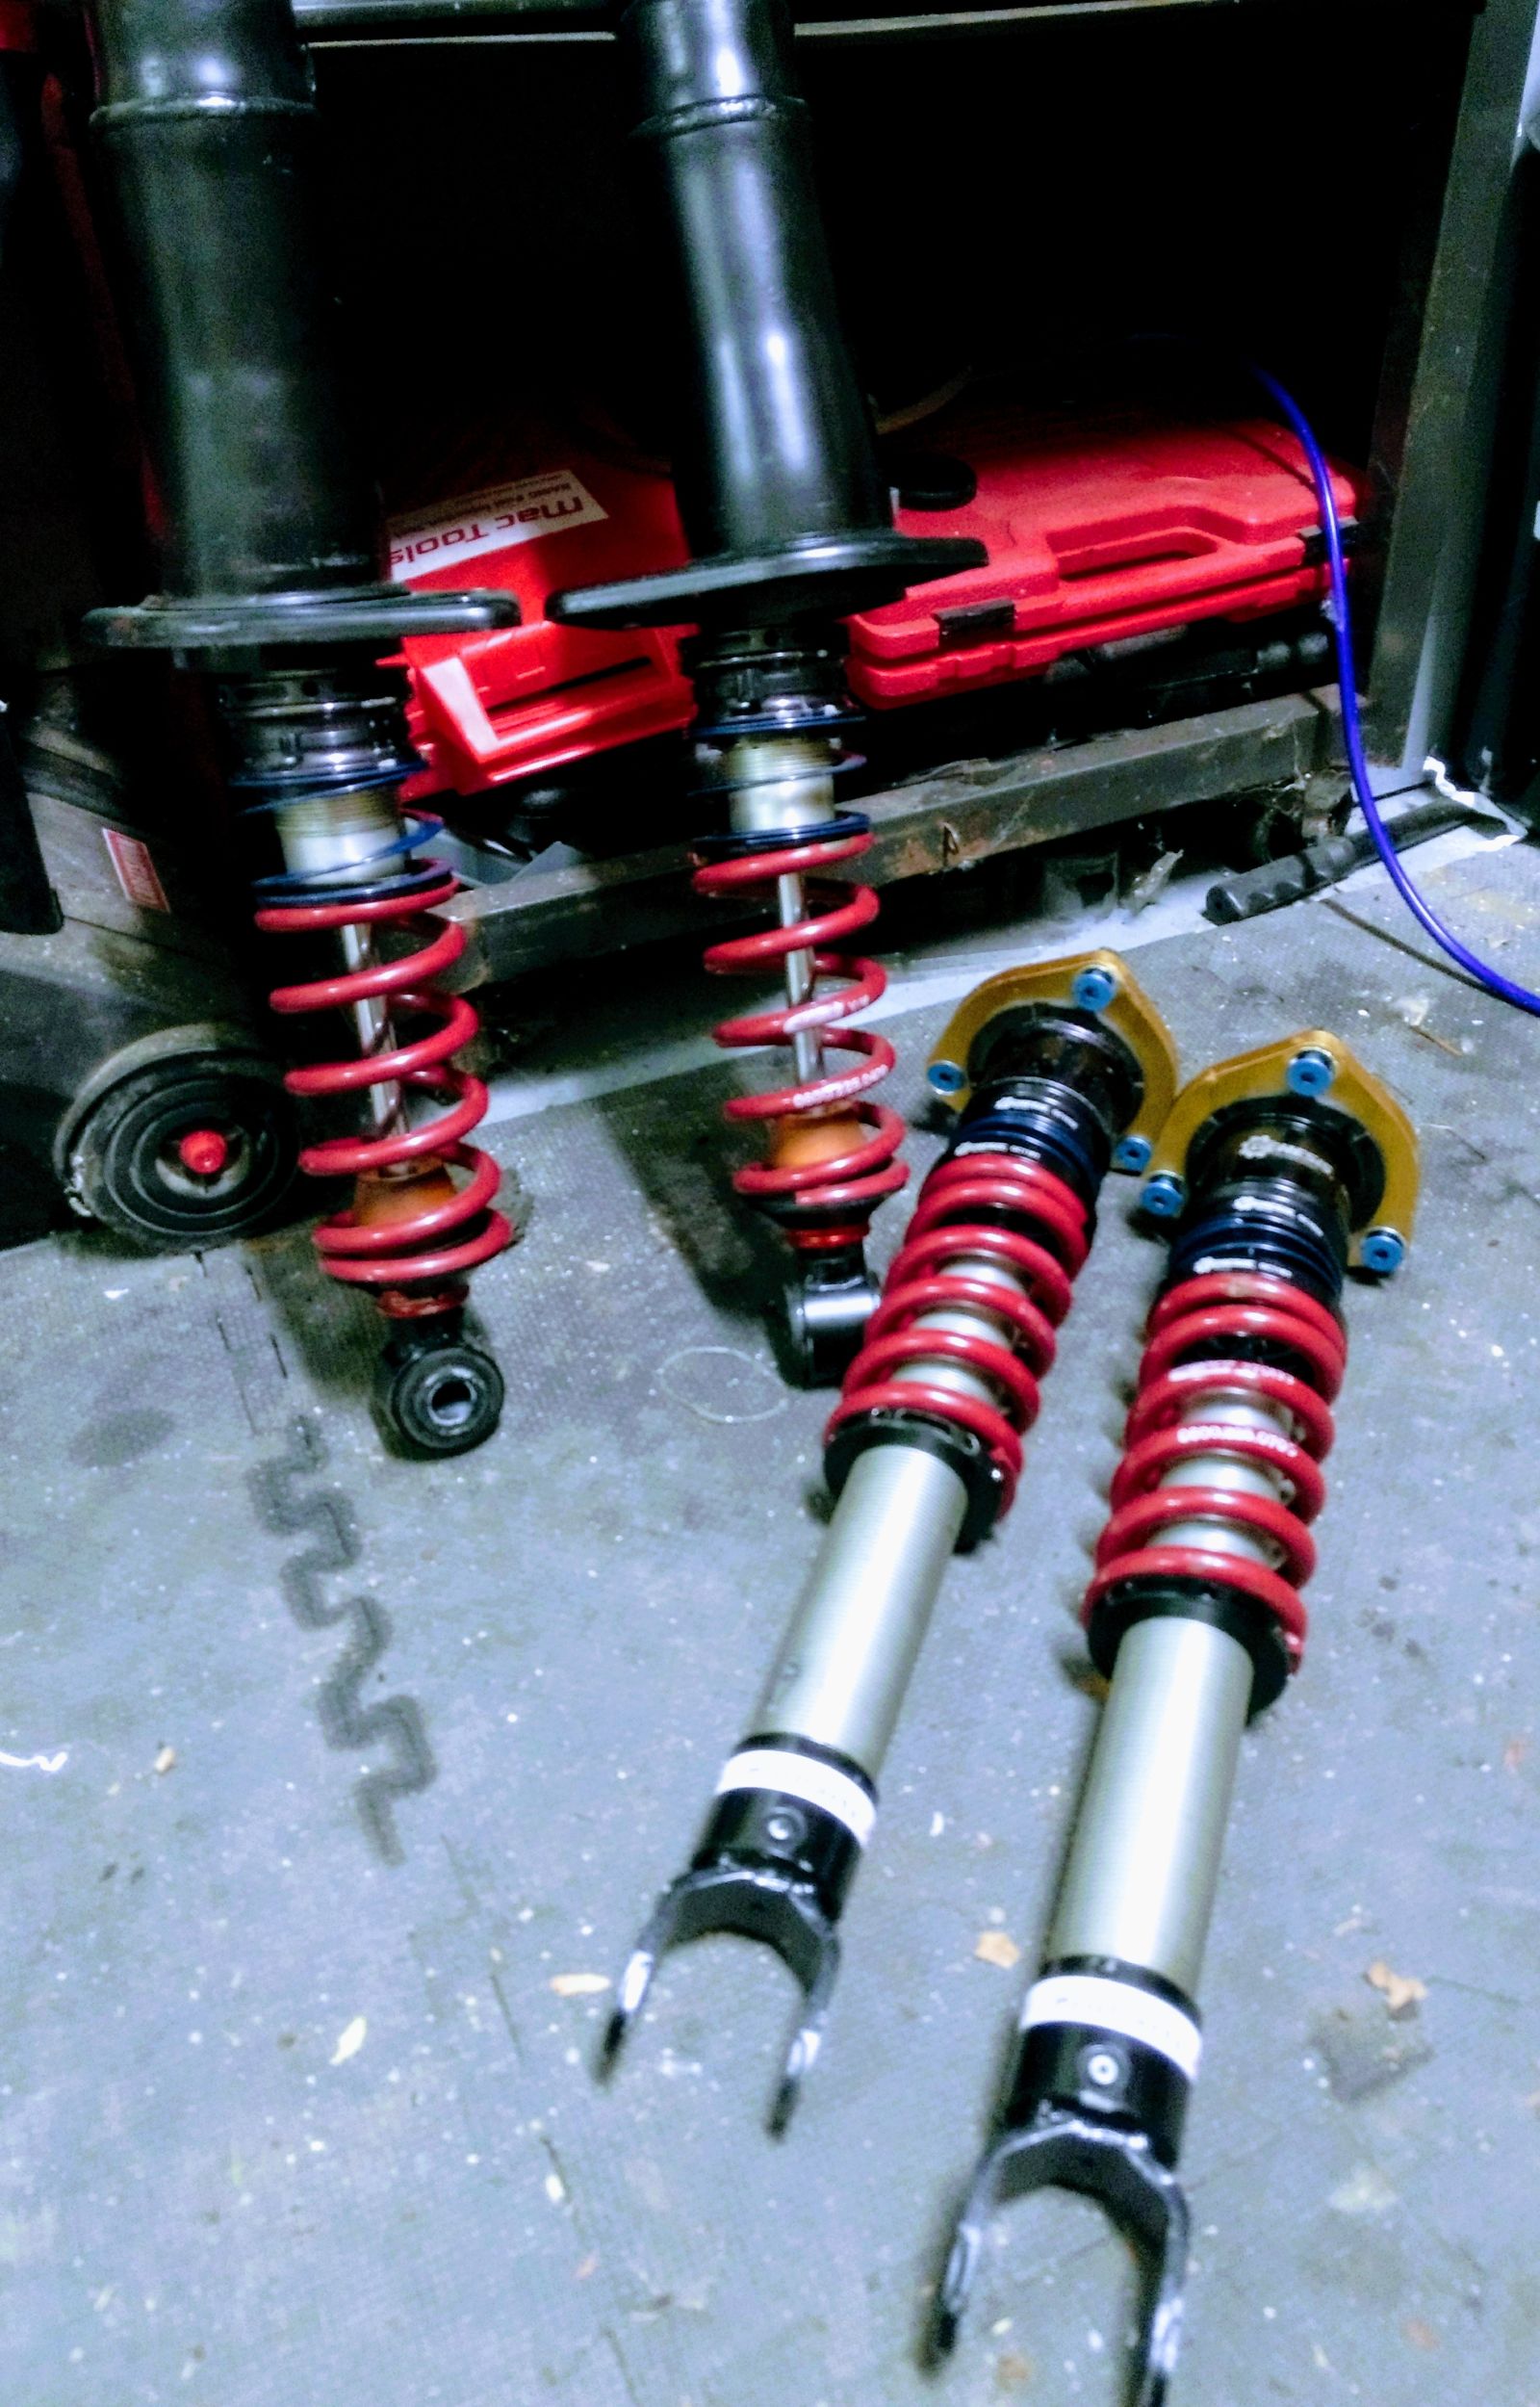 With the aluminum shock bodies, they are quite light. I measured a 5.1lb weight savings in the rear.